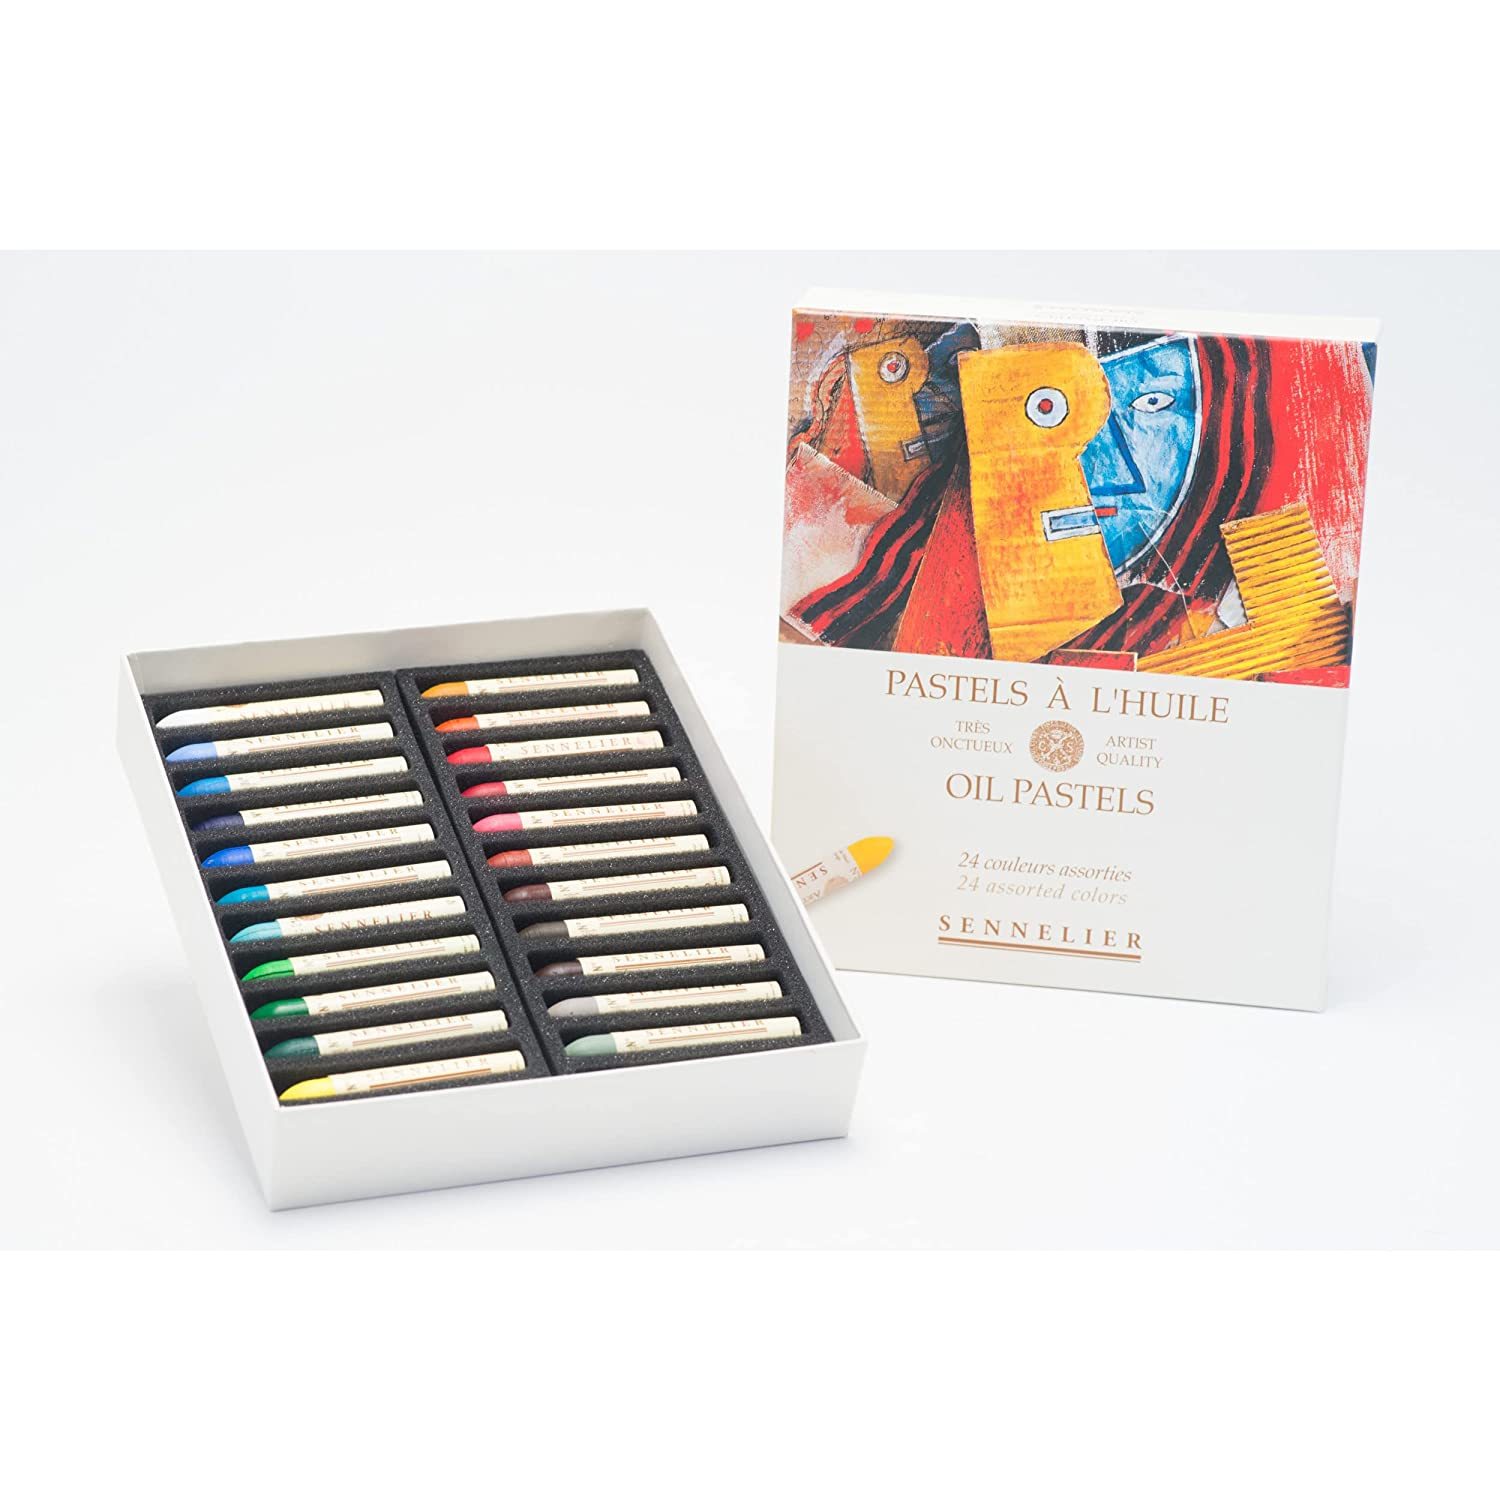 MUNGYO Gallery Soft Oil Pastels Set of 48 Count (Pack 1), Assorted